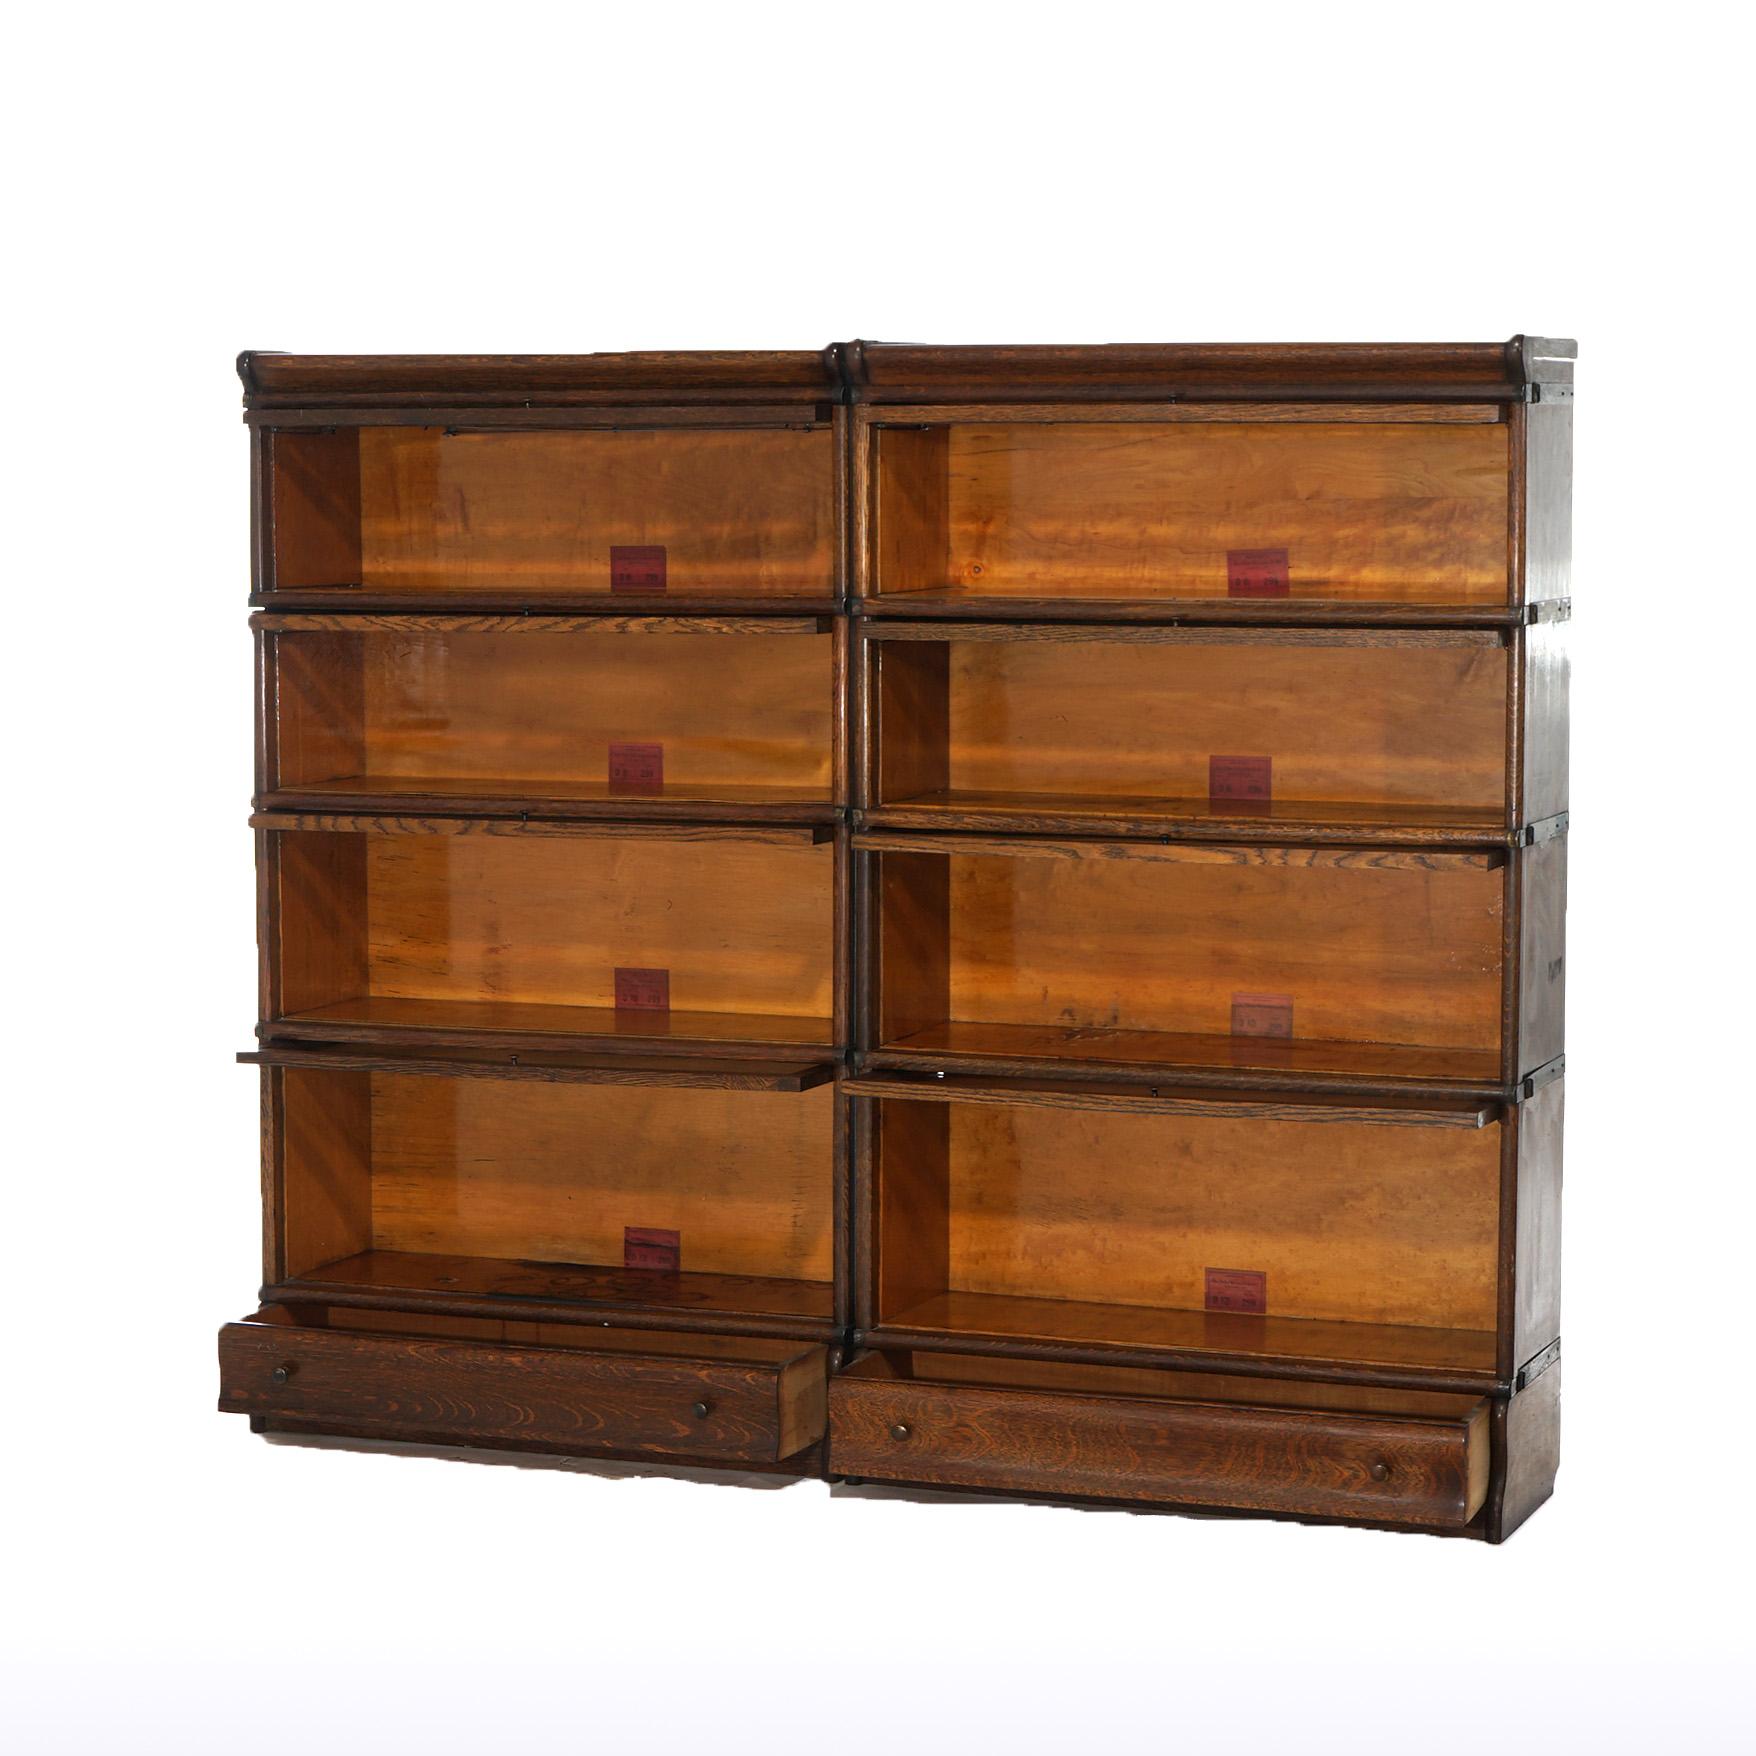 An antique pair of Arts and Crafts barrister bookcases by Globe Wernicke offer quarter sawn oak construction with four stacks, each having pull-out glass doors with single leaded glass door, raised on an ogee base with maker label as photographed,